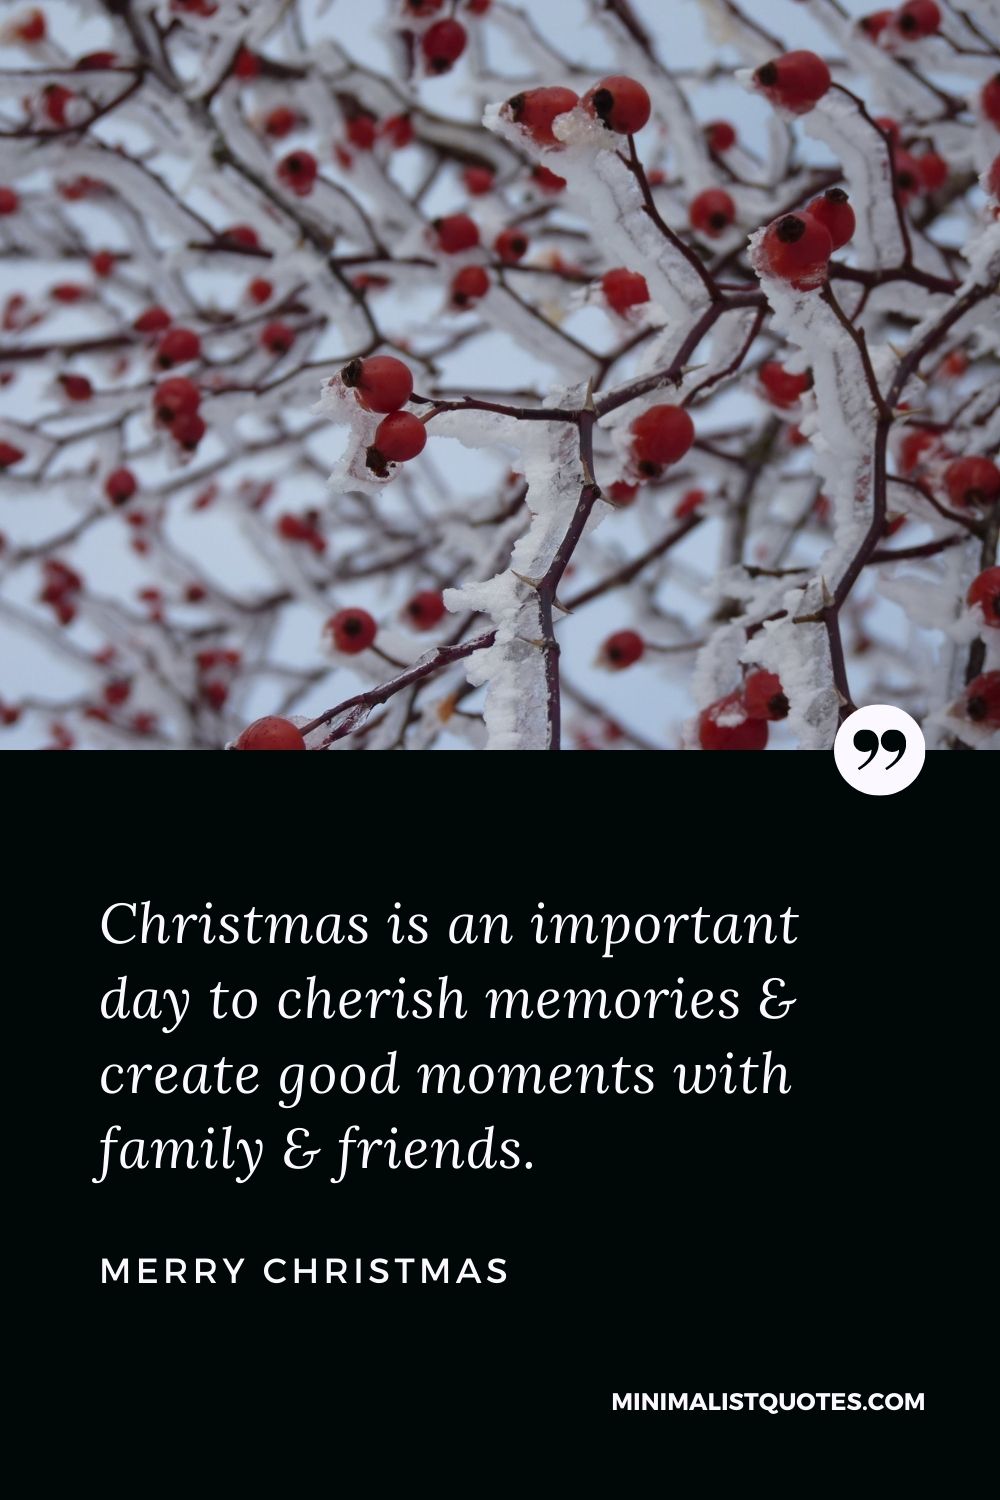 Merry Christmas Wish - Christmas is an important day to cherish memories & create good moments with family & friends.